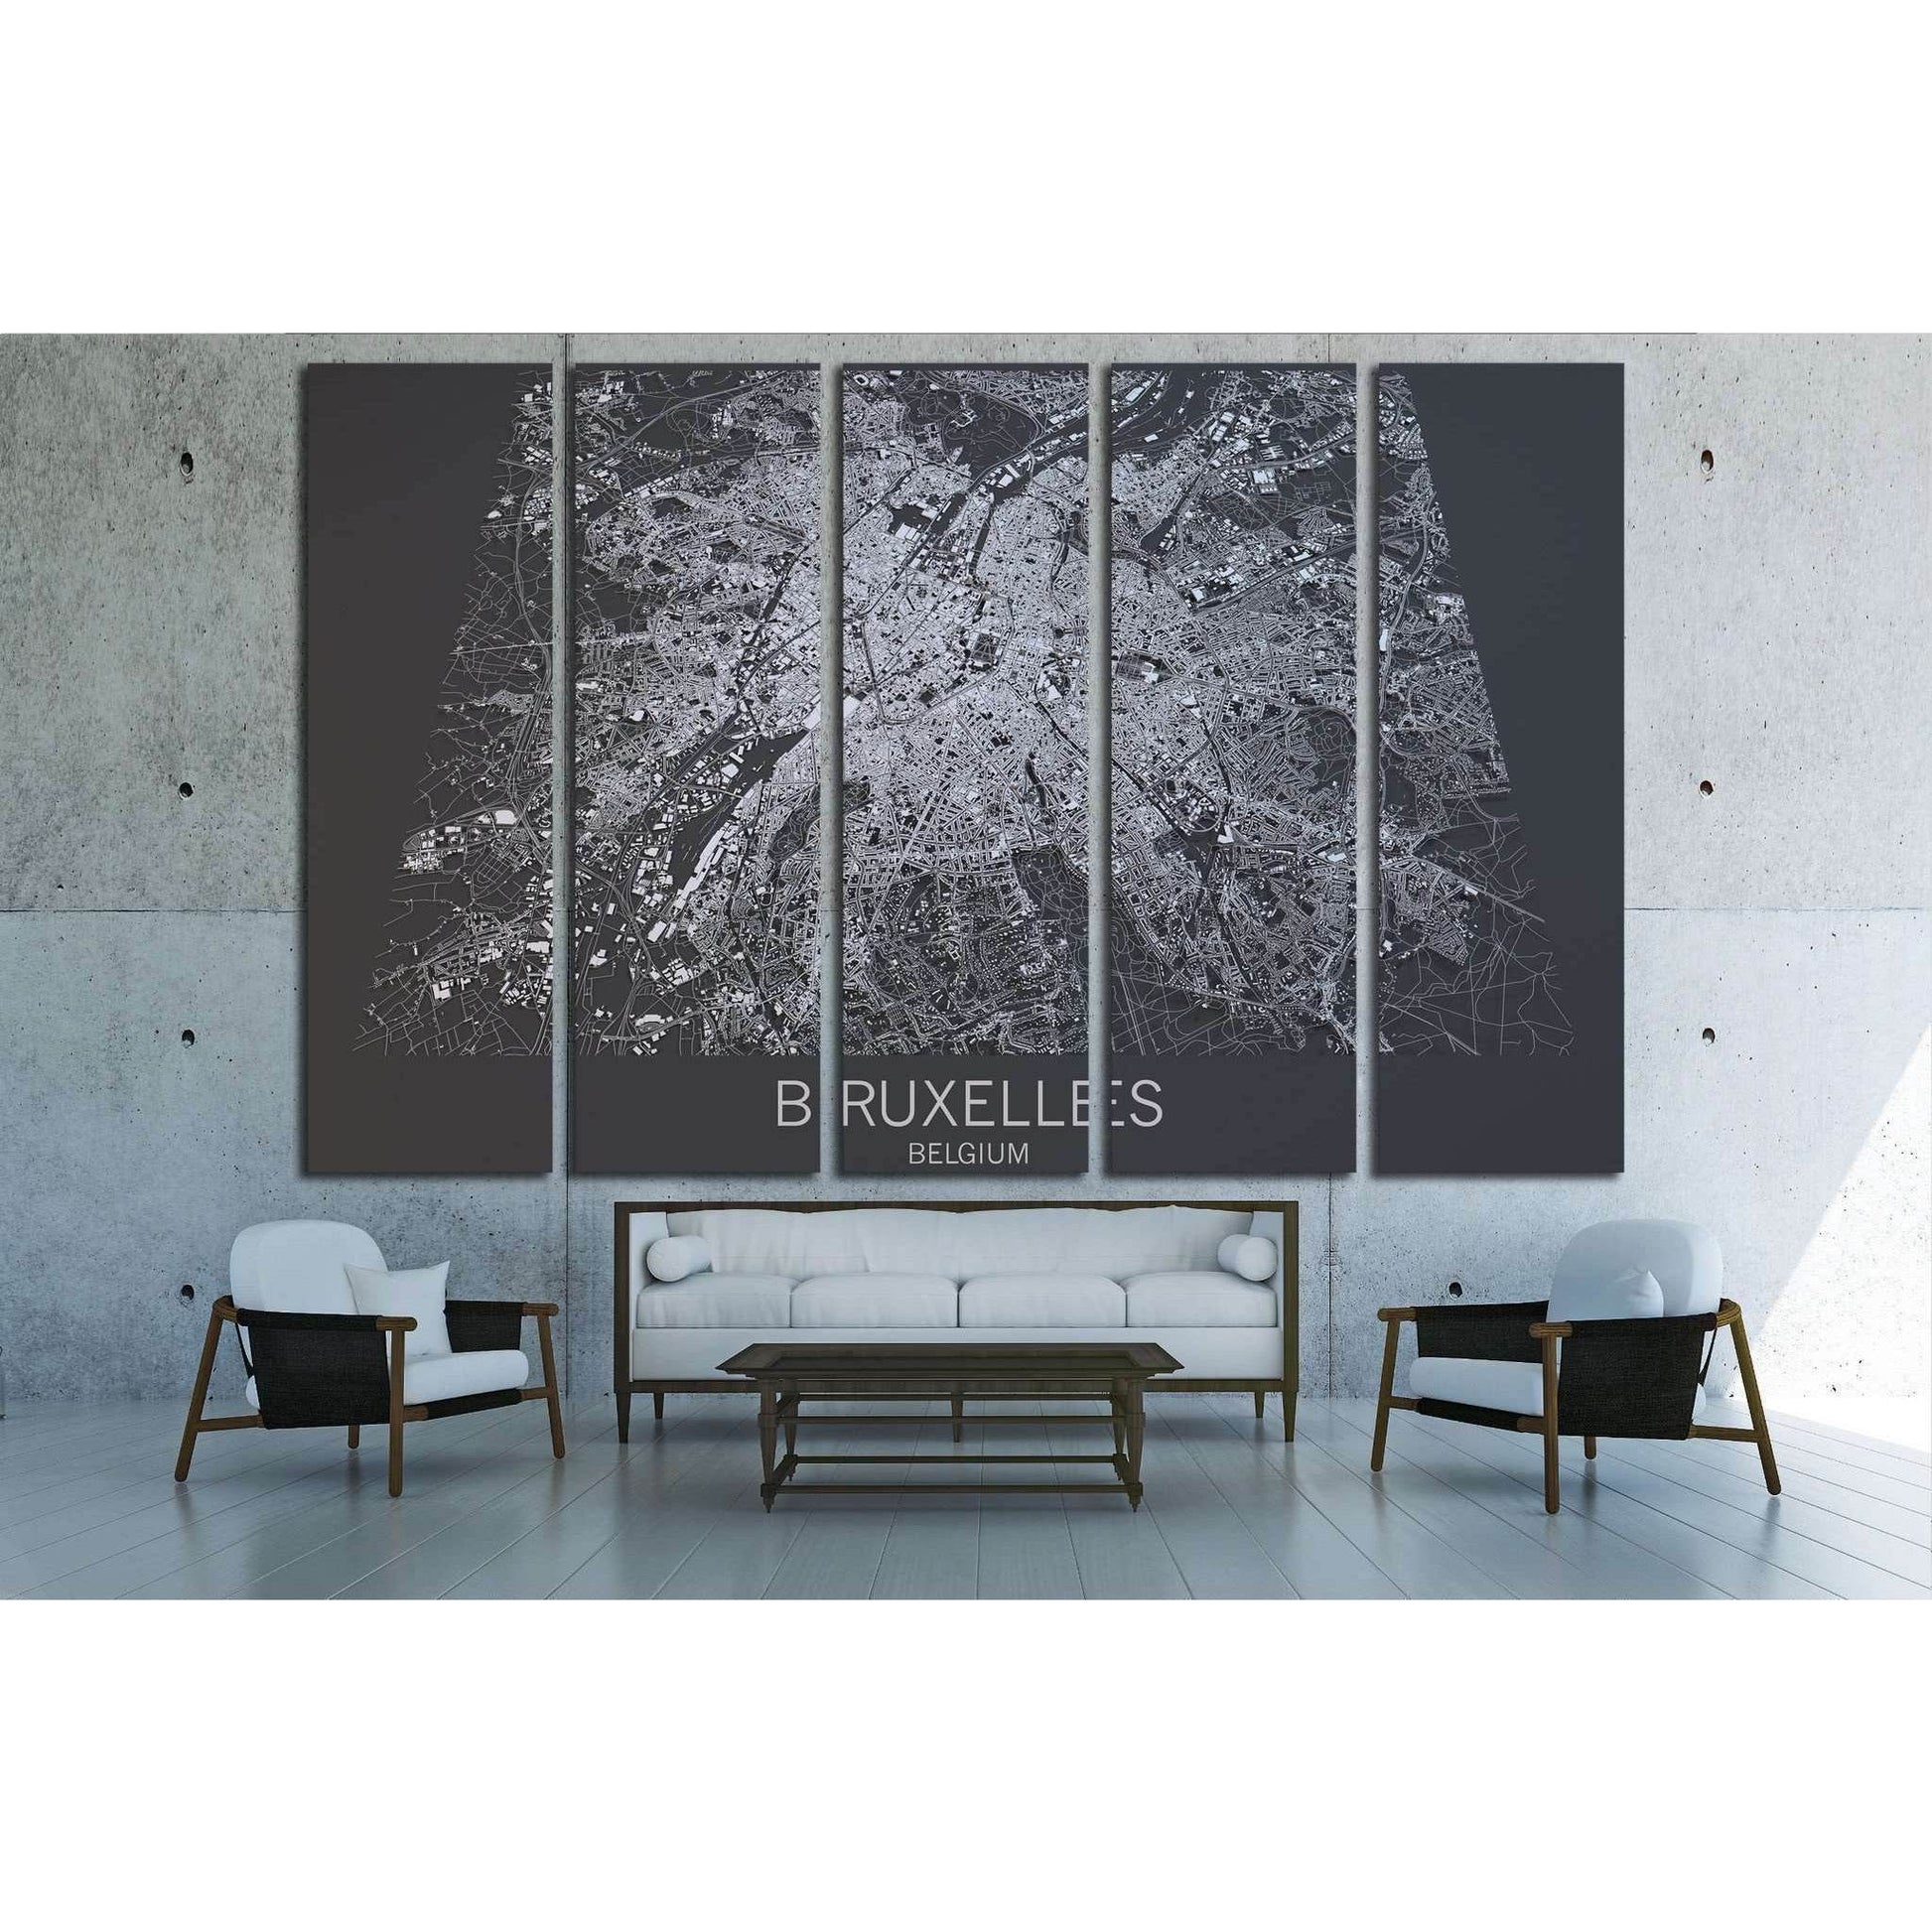 Map of Bruxelles Canvas PrintDecorate your walls with a stunning Bruxelles Map Canvas Art Print from the world's largest art gallery. Choose from thousands of Map artworks with various sizing options. Choose your perfect art print to complete your home de